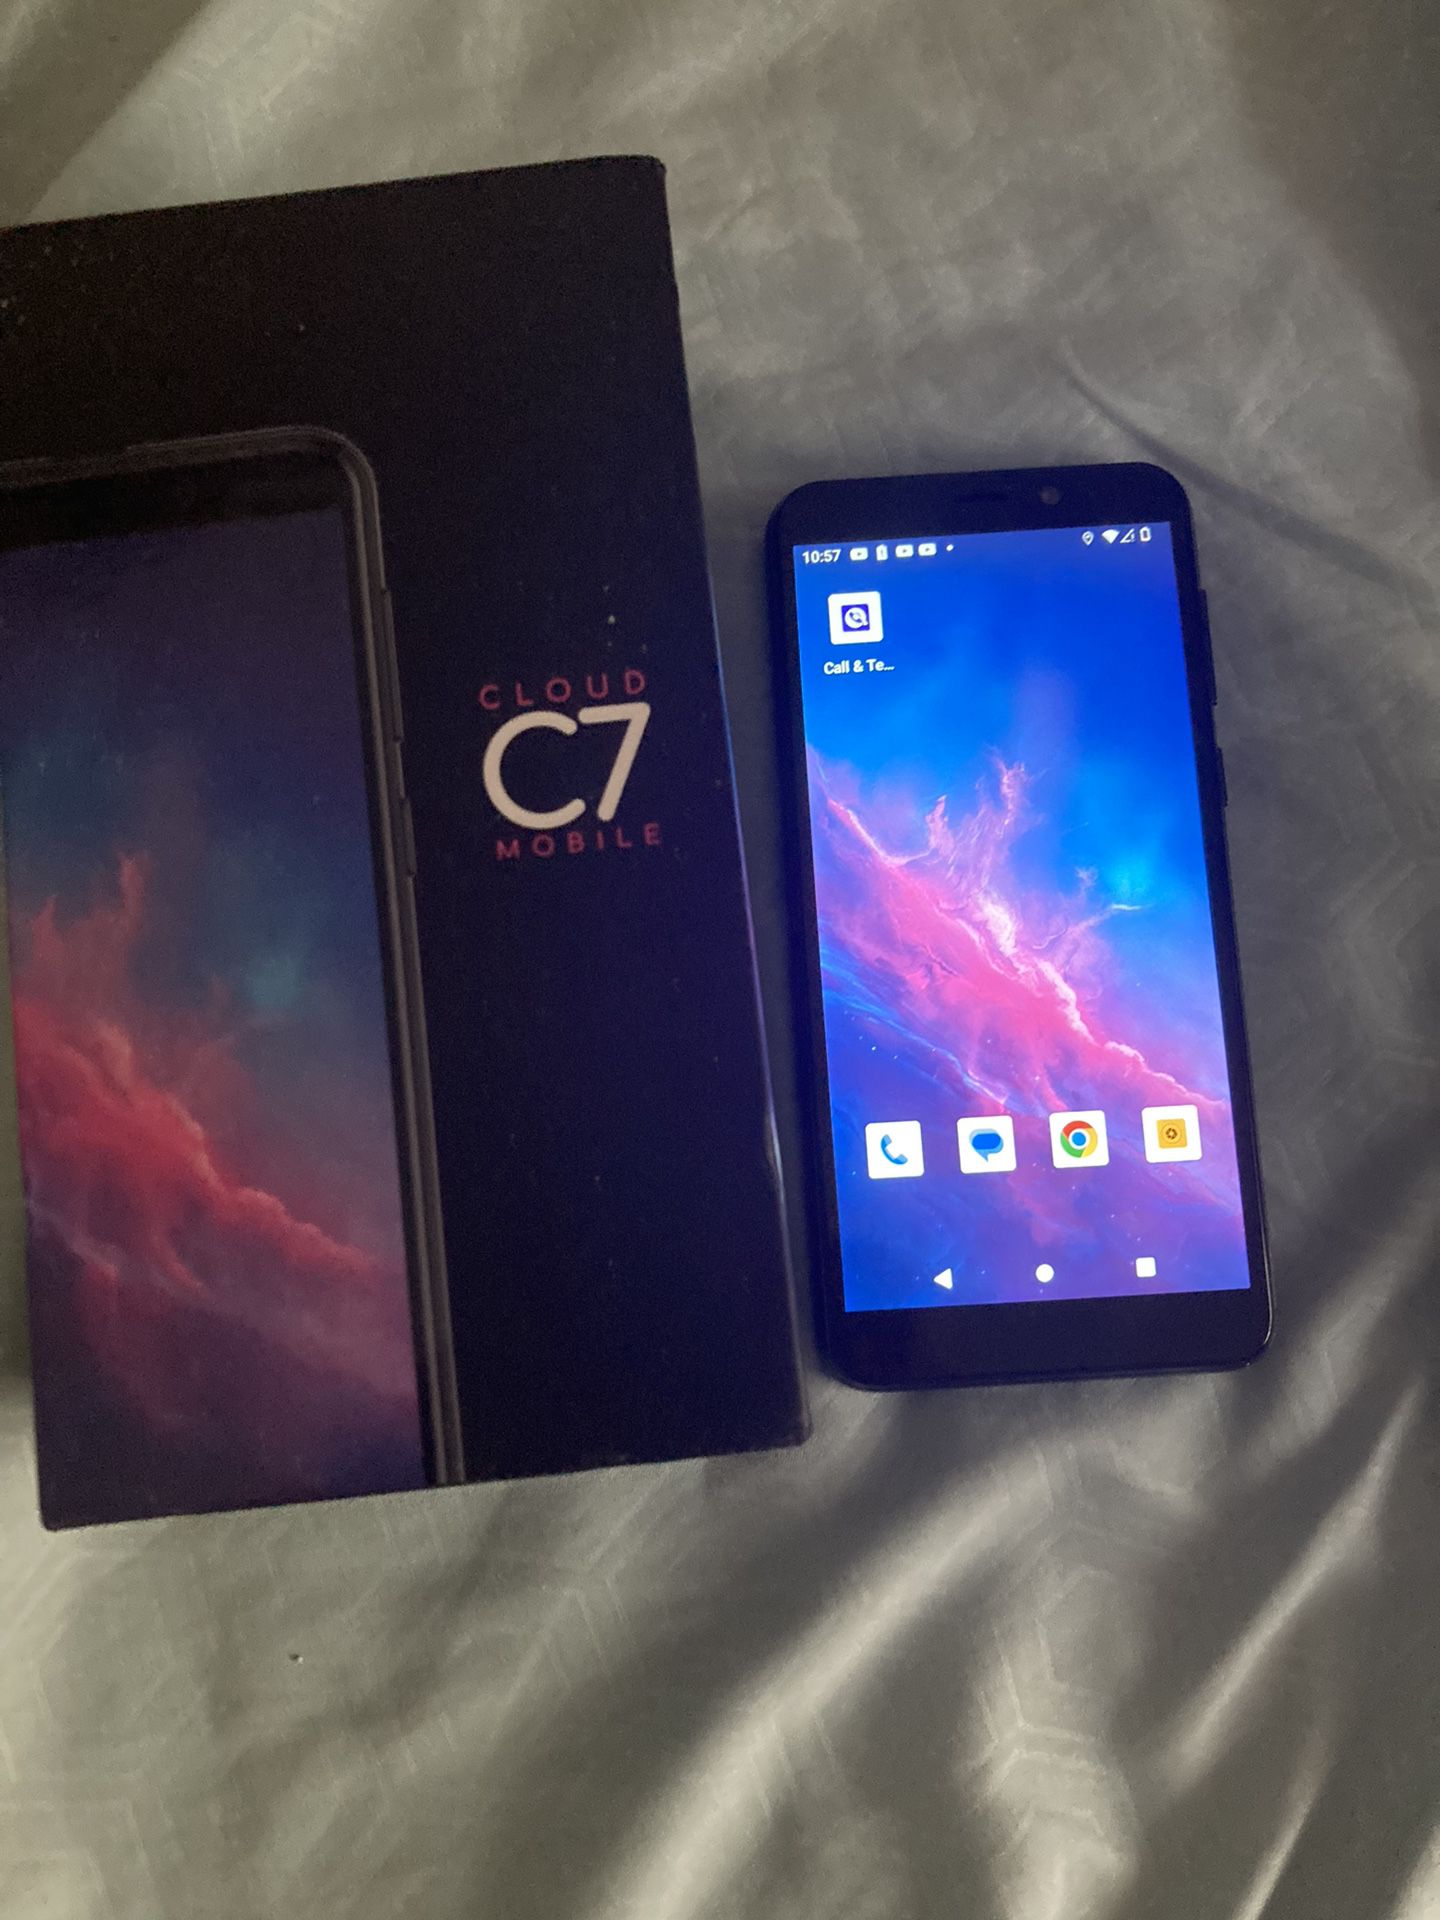 C7 Android Phone/ New 